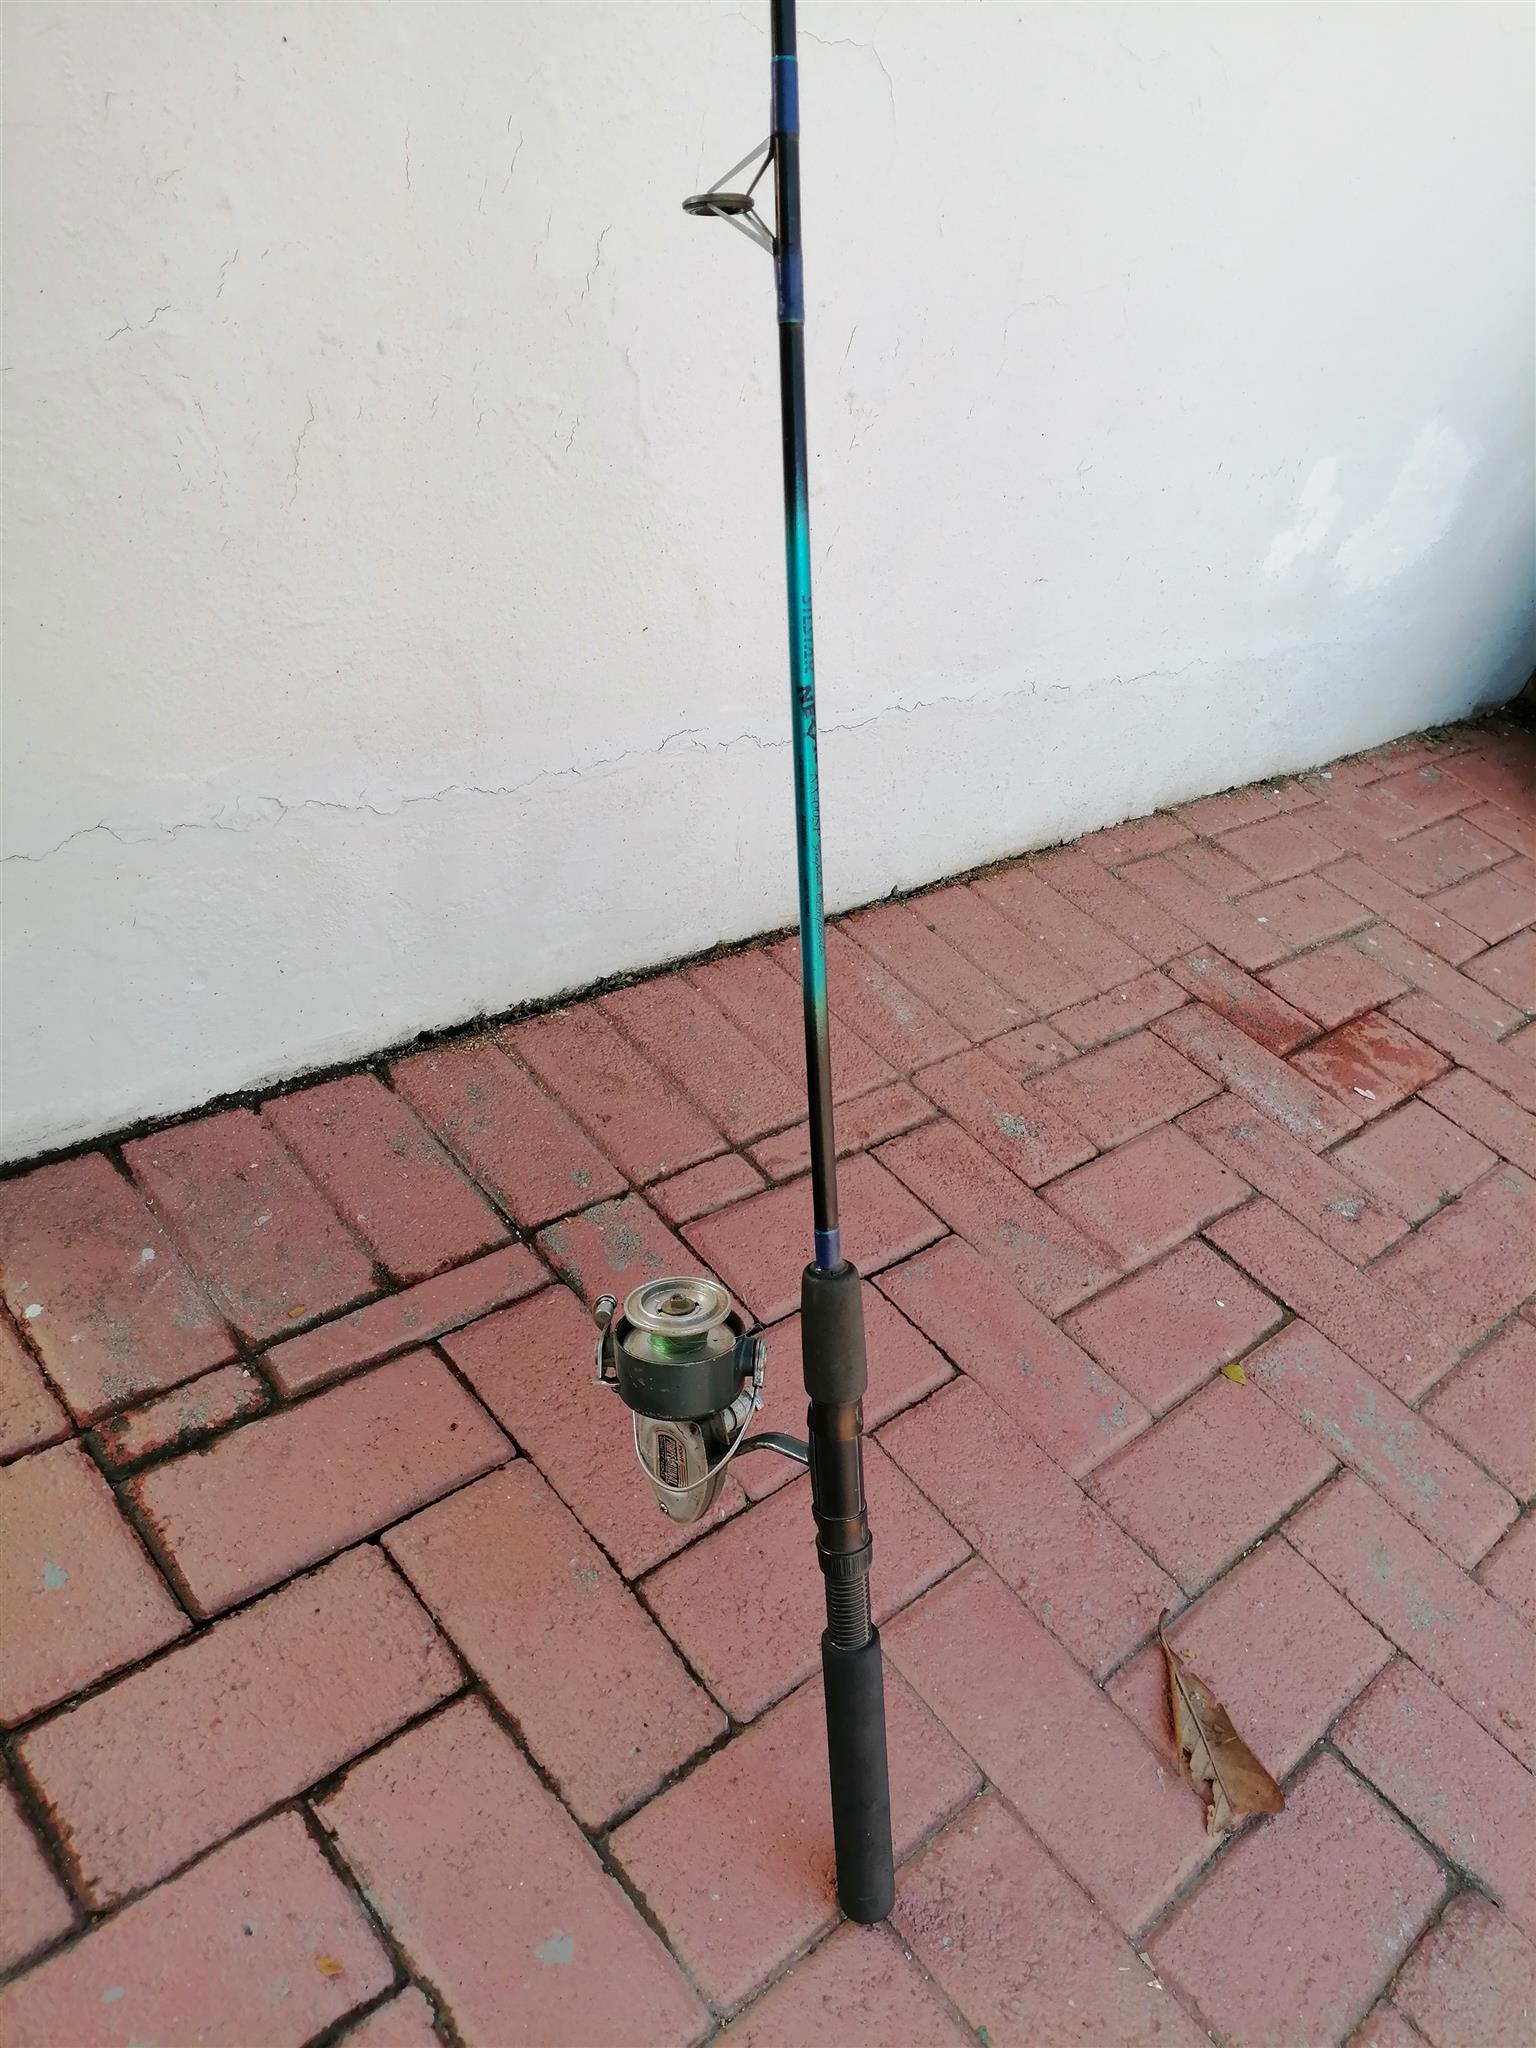 Children fishing rod2100mm with catrol. with catrol .